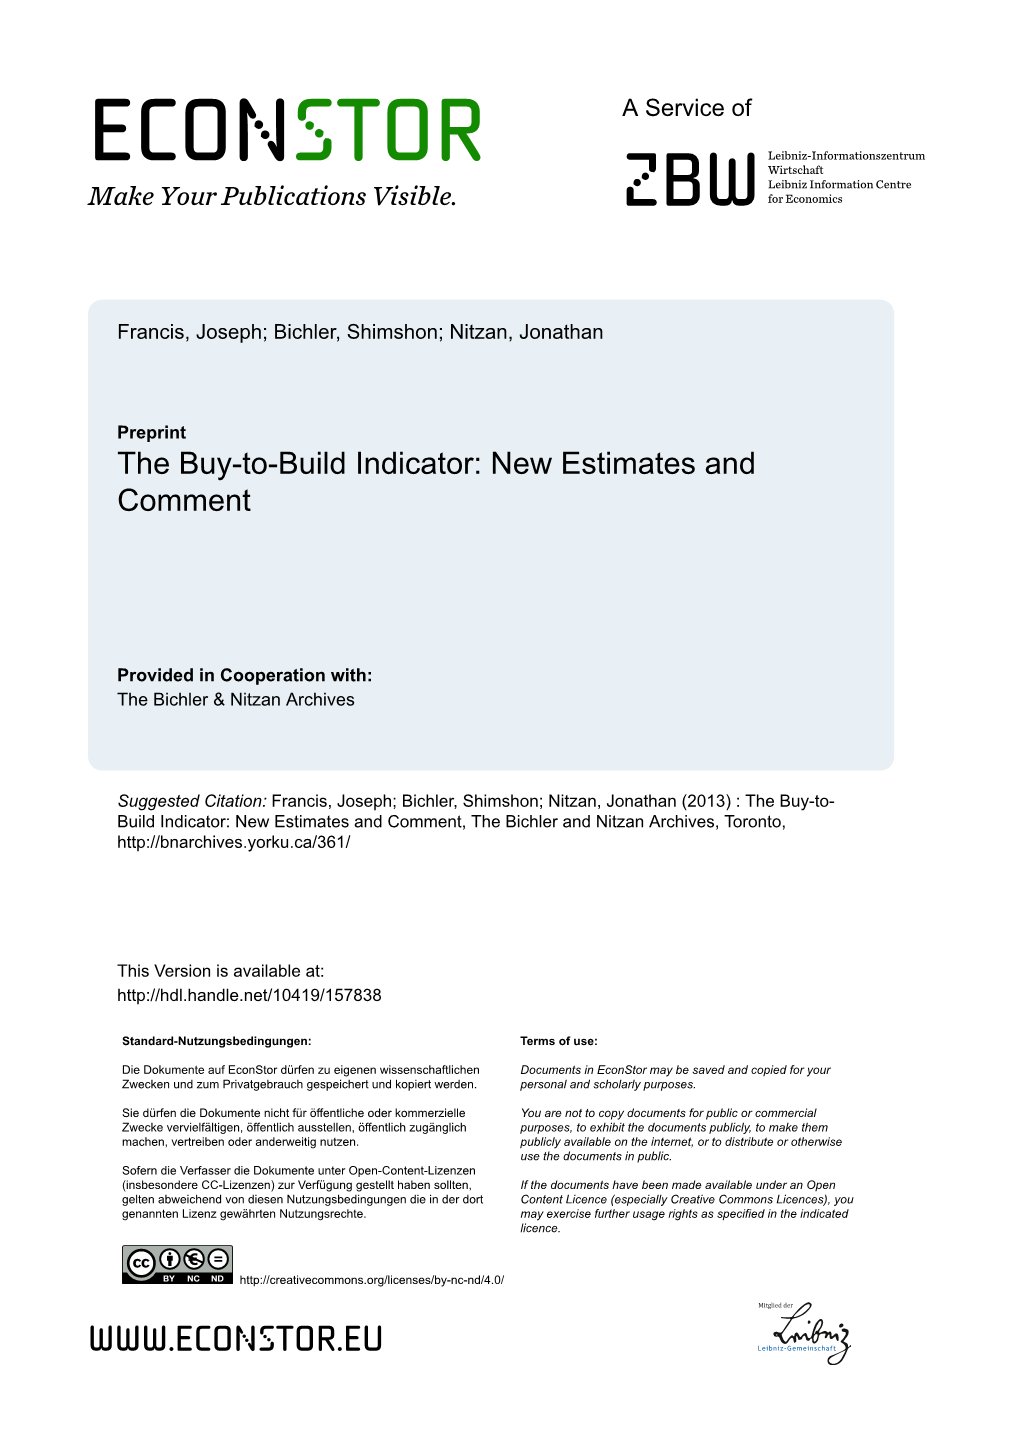 The Buy-To-Build Indicator: New Estimates and Comment